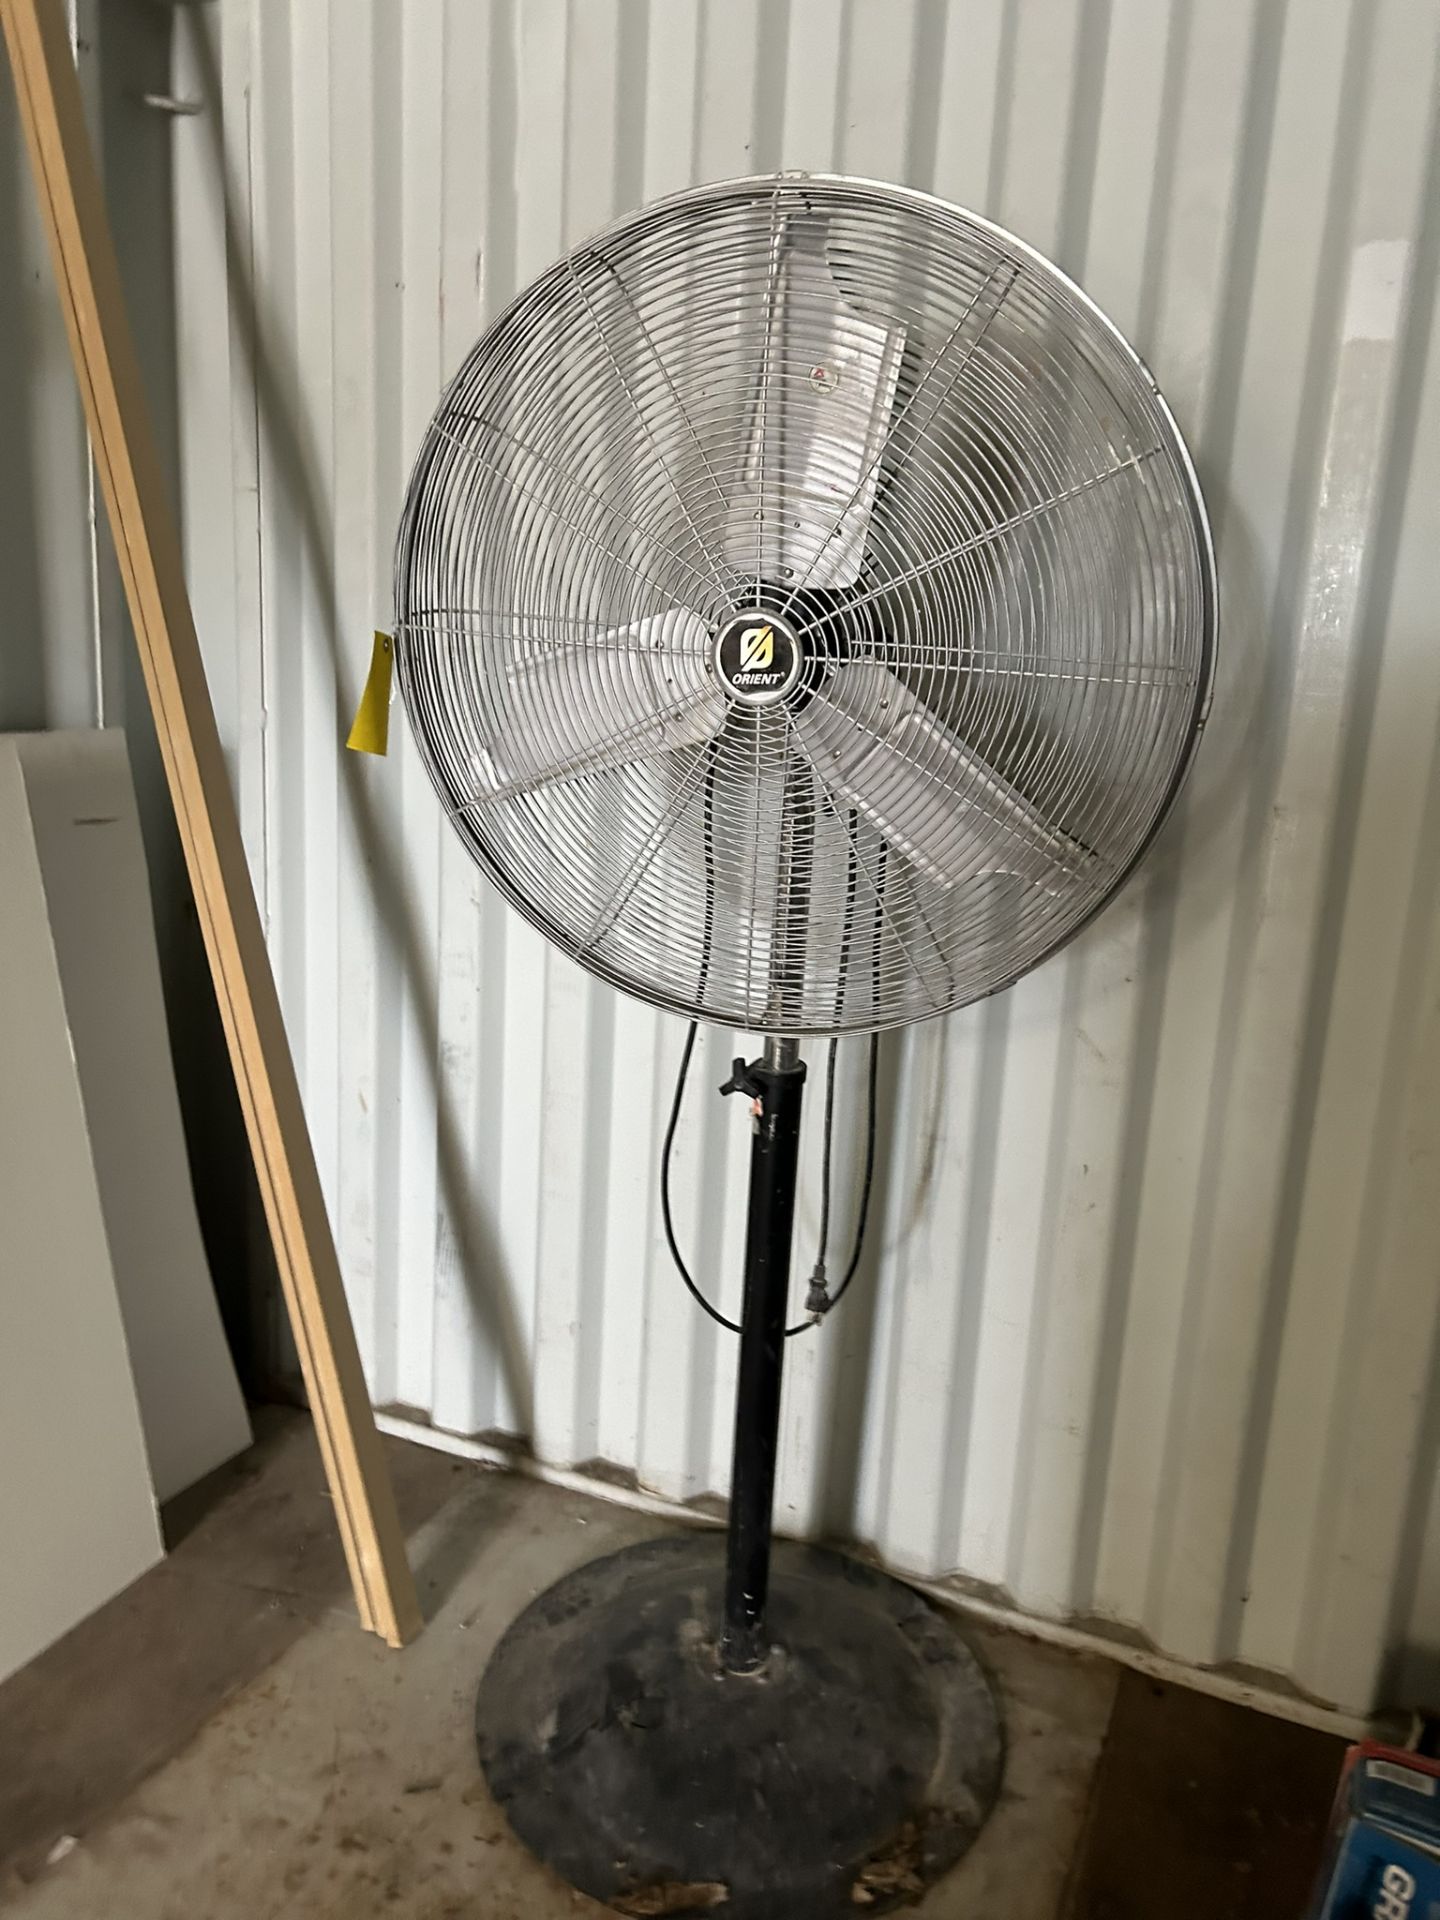 24" PEDESTAL AIR MOVING FAN - Image 2 of 3